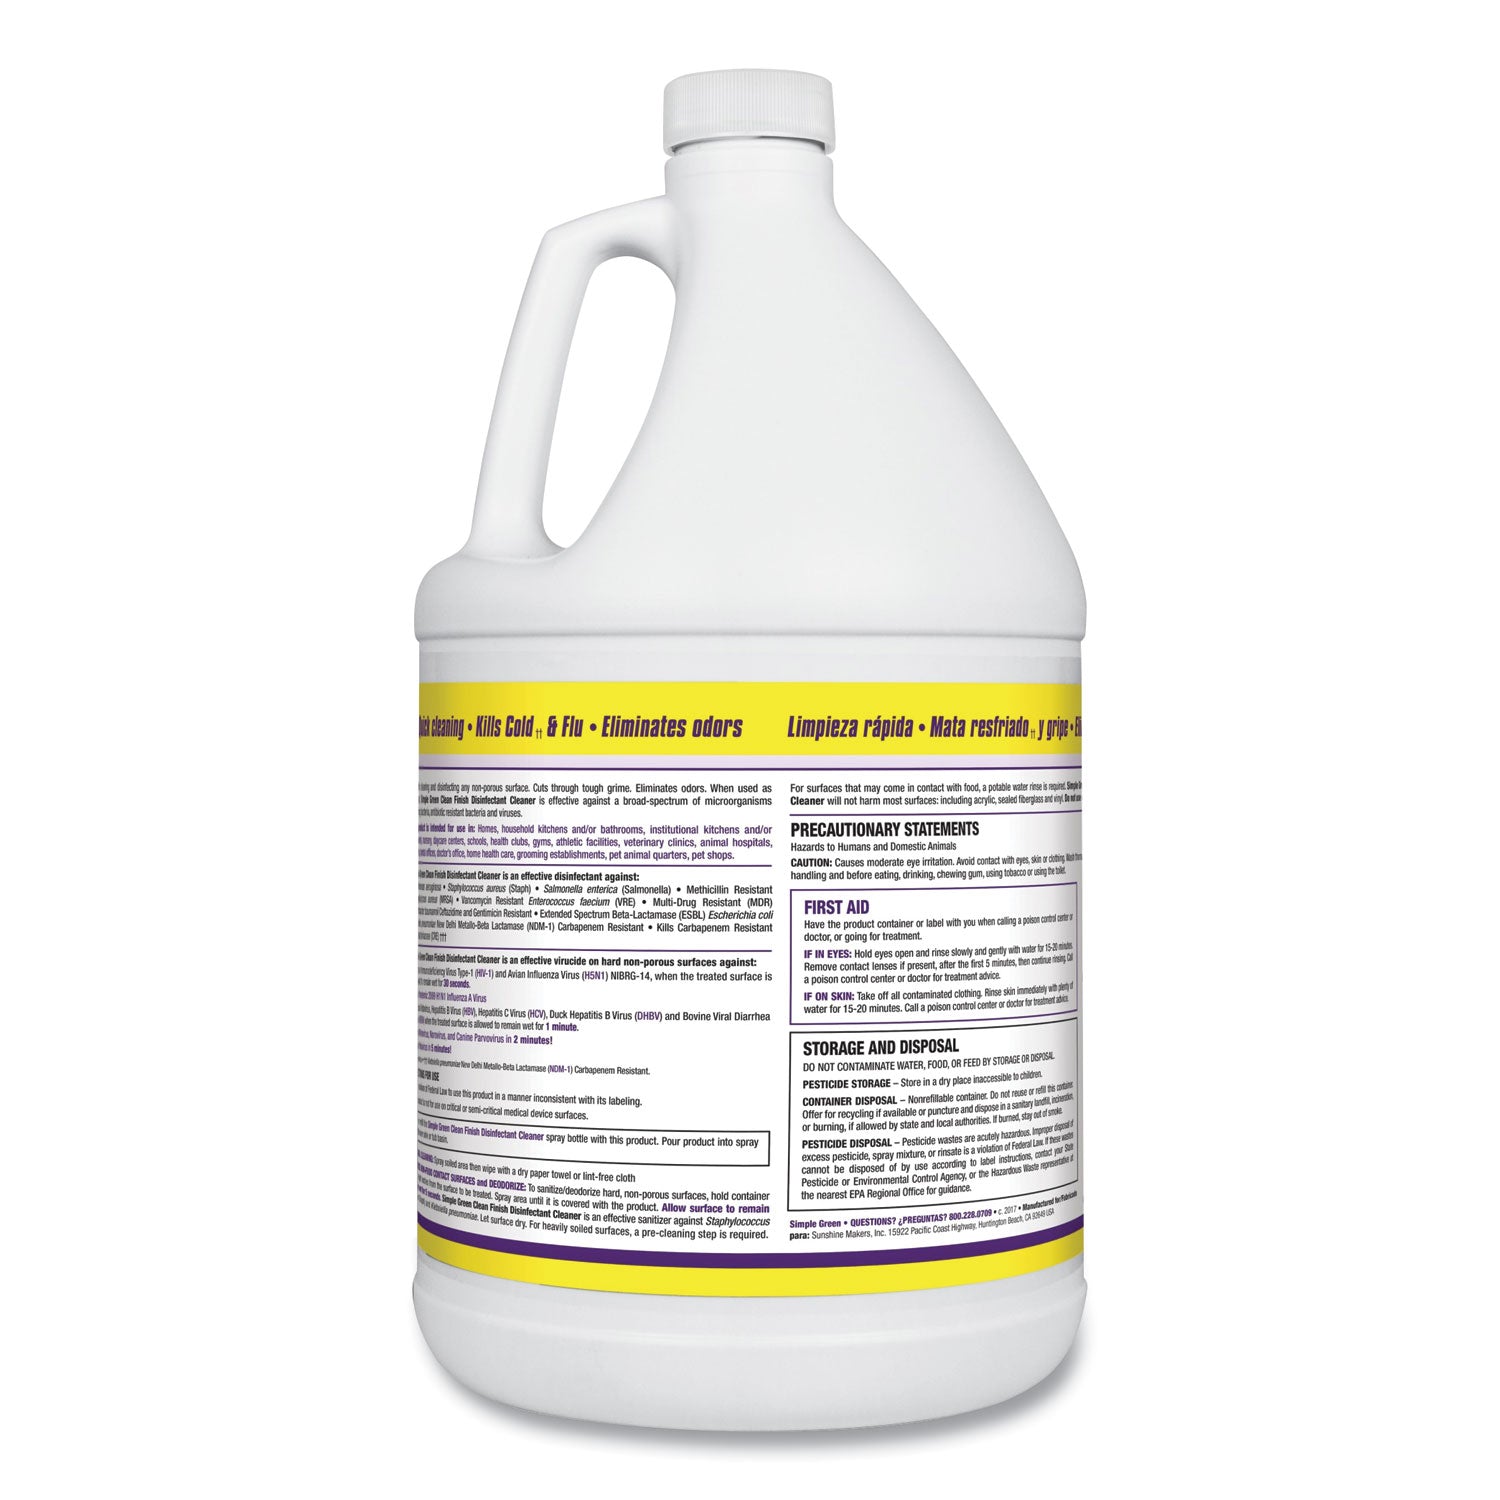 clean-finish-disinfectant-cleaner-1-gal-bottle-herbal_smp01128ea - 2